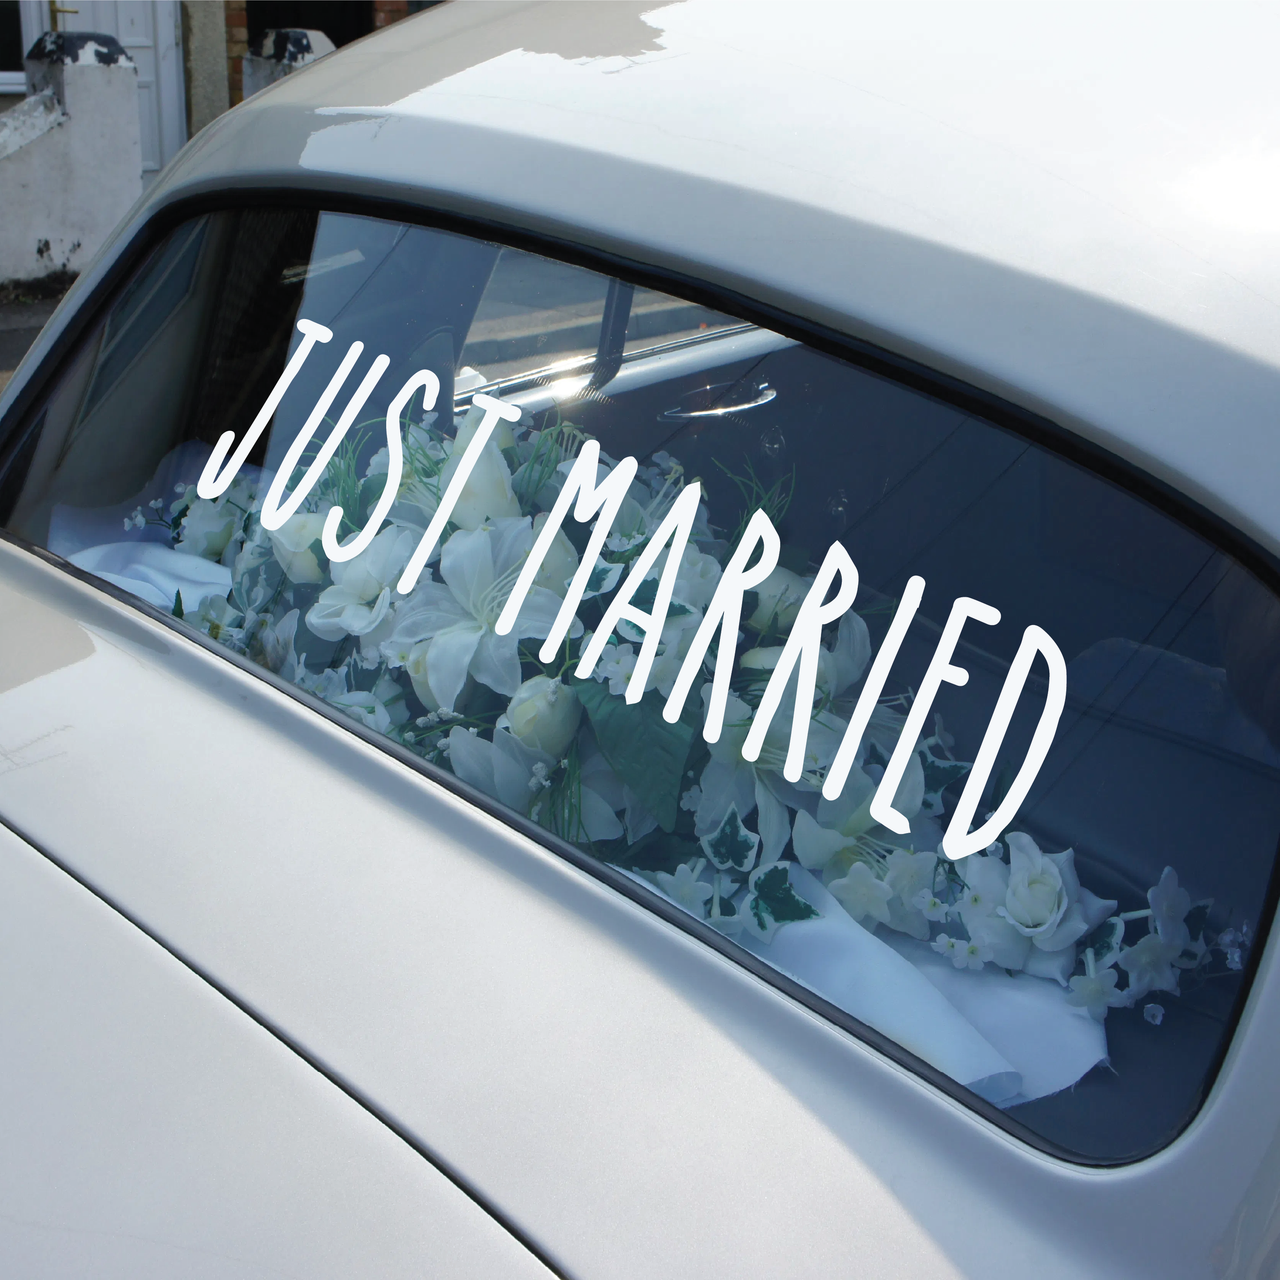 Just Married Wedding Car Decal Type 3